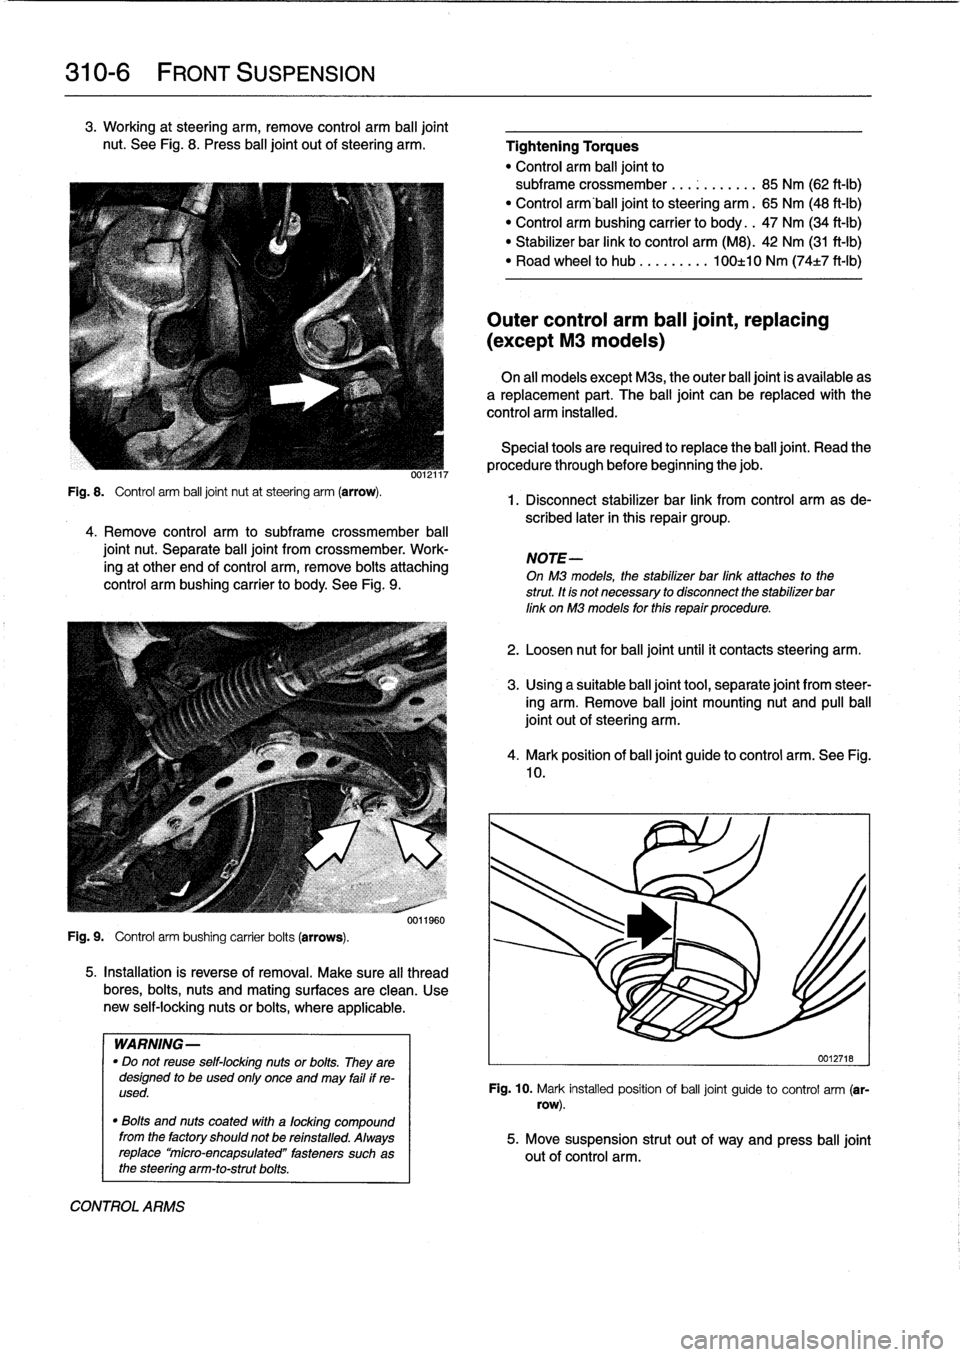 BMW 325i 1992 E36 Owners Manual 
310-
6

	

FRONT
SUSPENSION

3
.
Working
at
steering
arm,
remove
control
arm
balljoint

nut
.
See
Fig
.
8
.
Press
ball
joint
out
ofsteering
arm
.

Fig
.
8
.

	

Control
arm
ball
joint
nut
at
steering